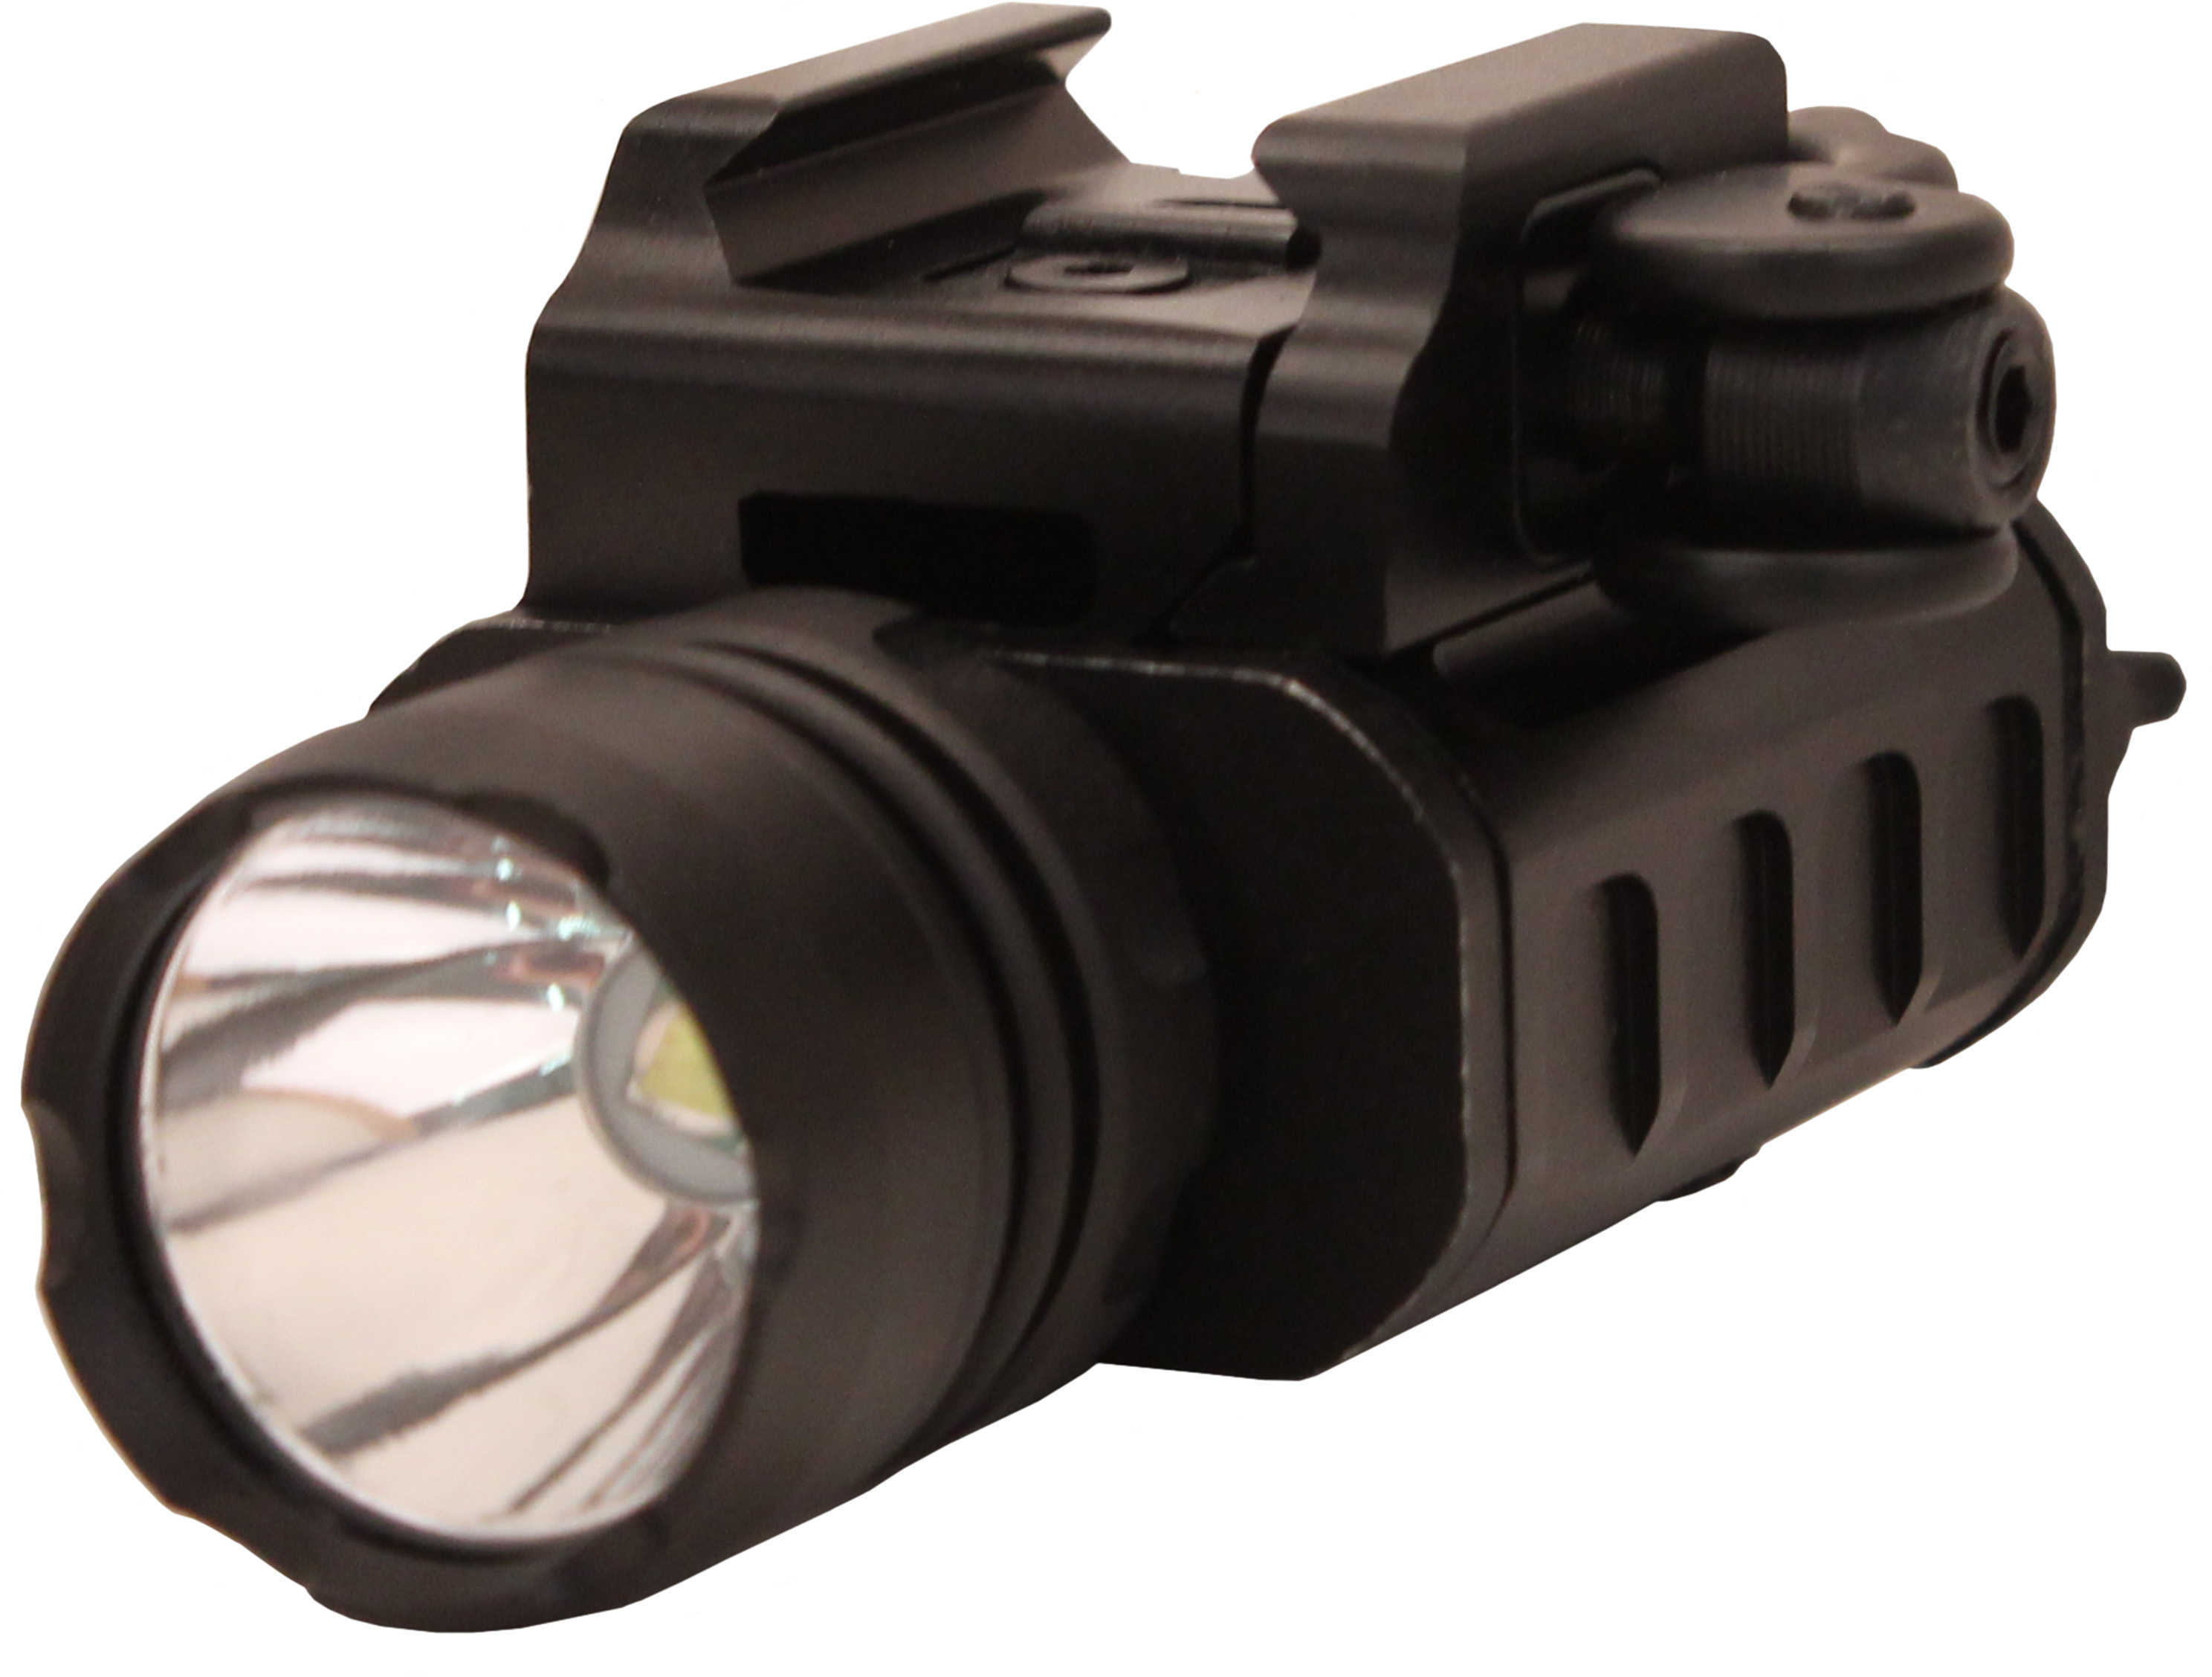 Leapers UTG Compact LED Weapon Light 400 Lum w QD Lever Lock